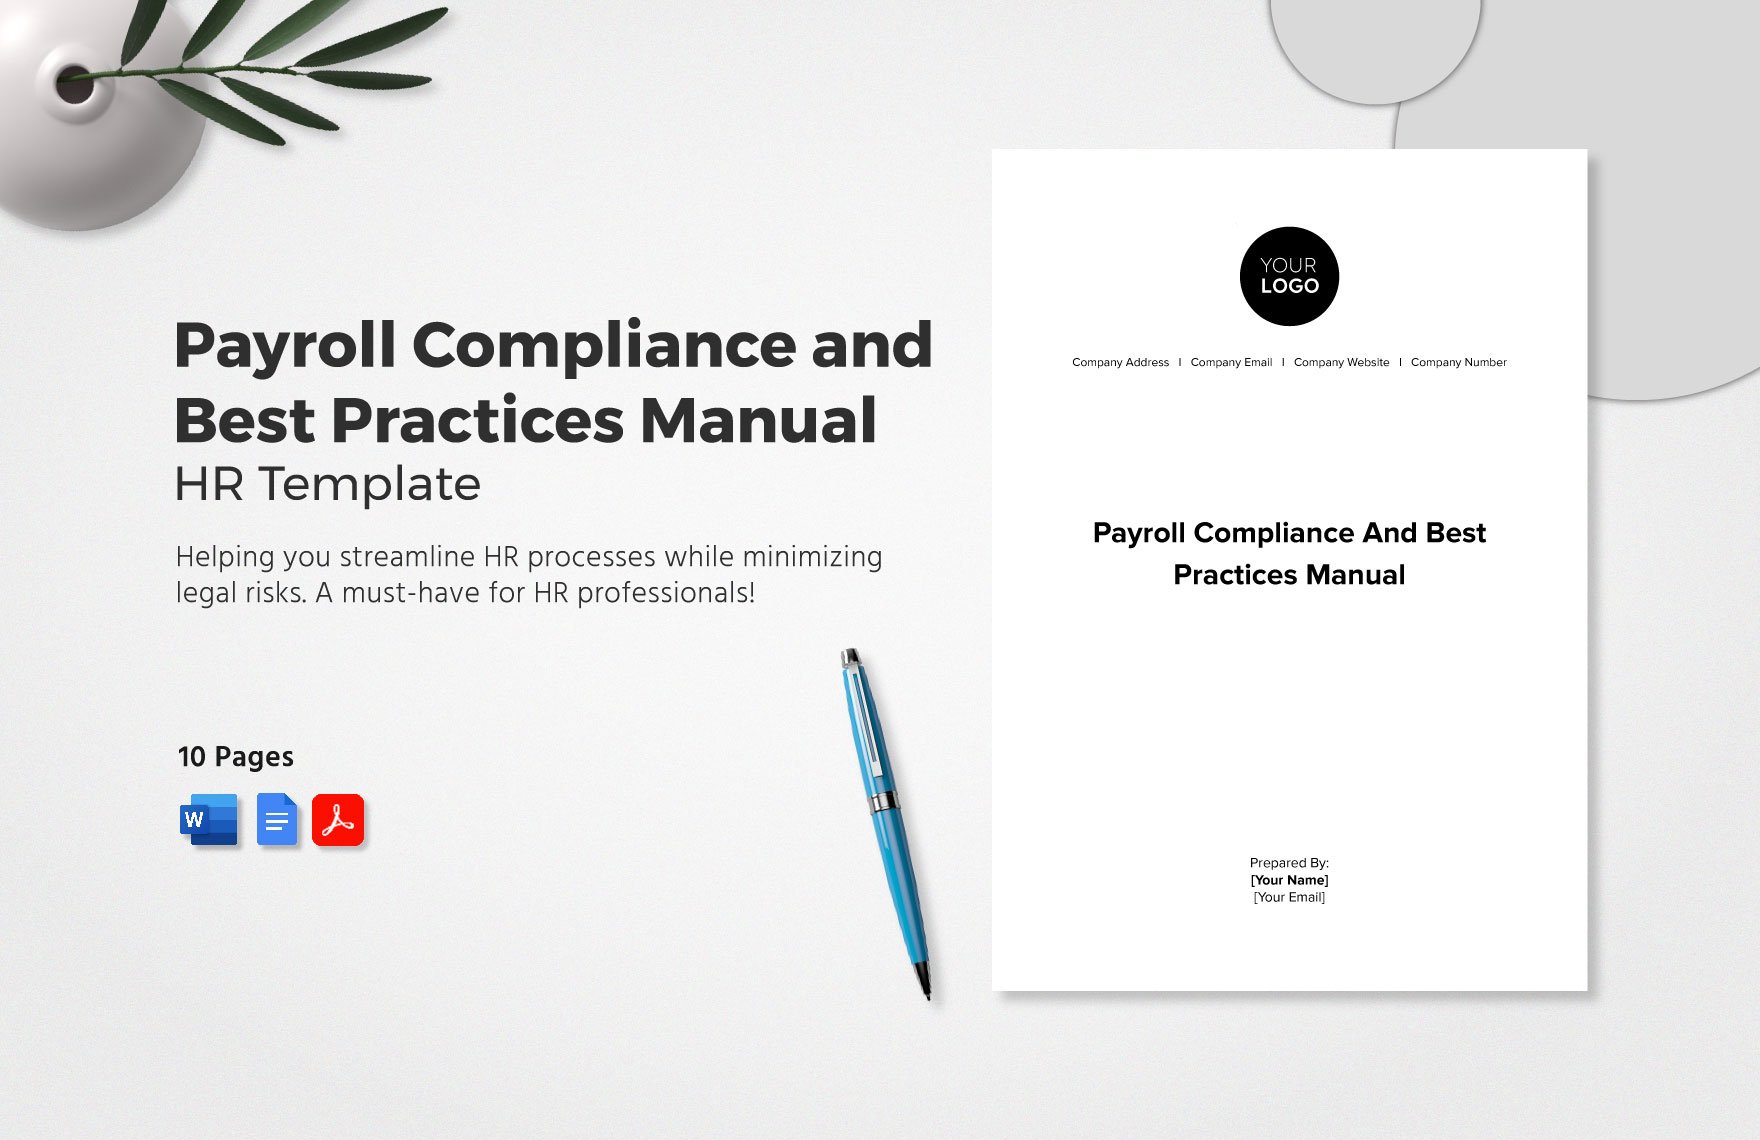 Payroll Compliance and Best Practices Manual HR Template